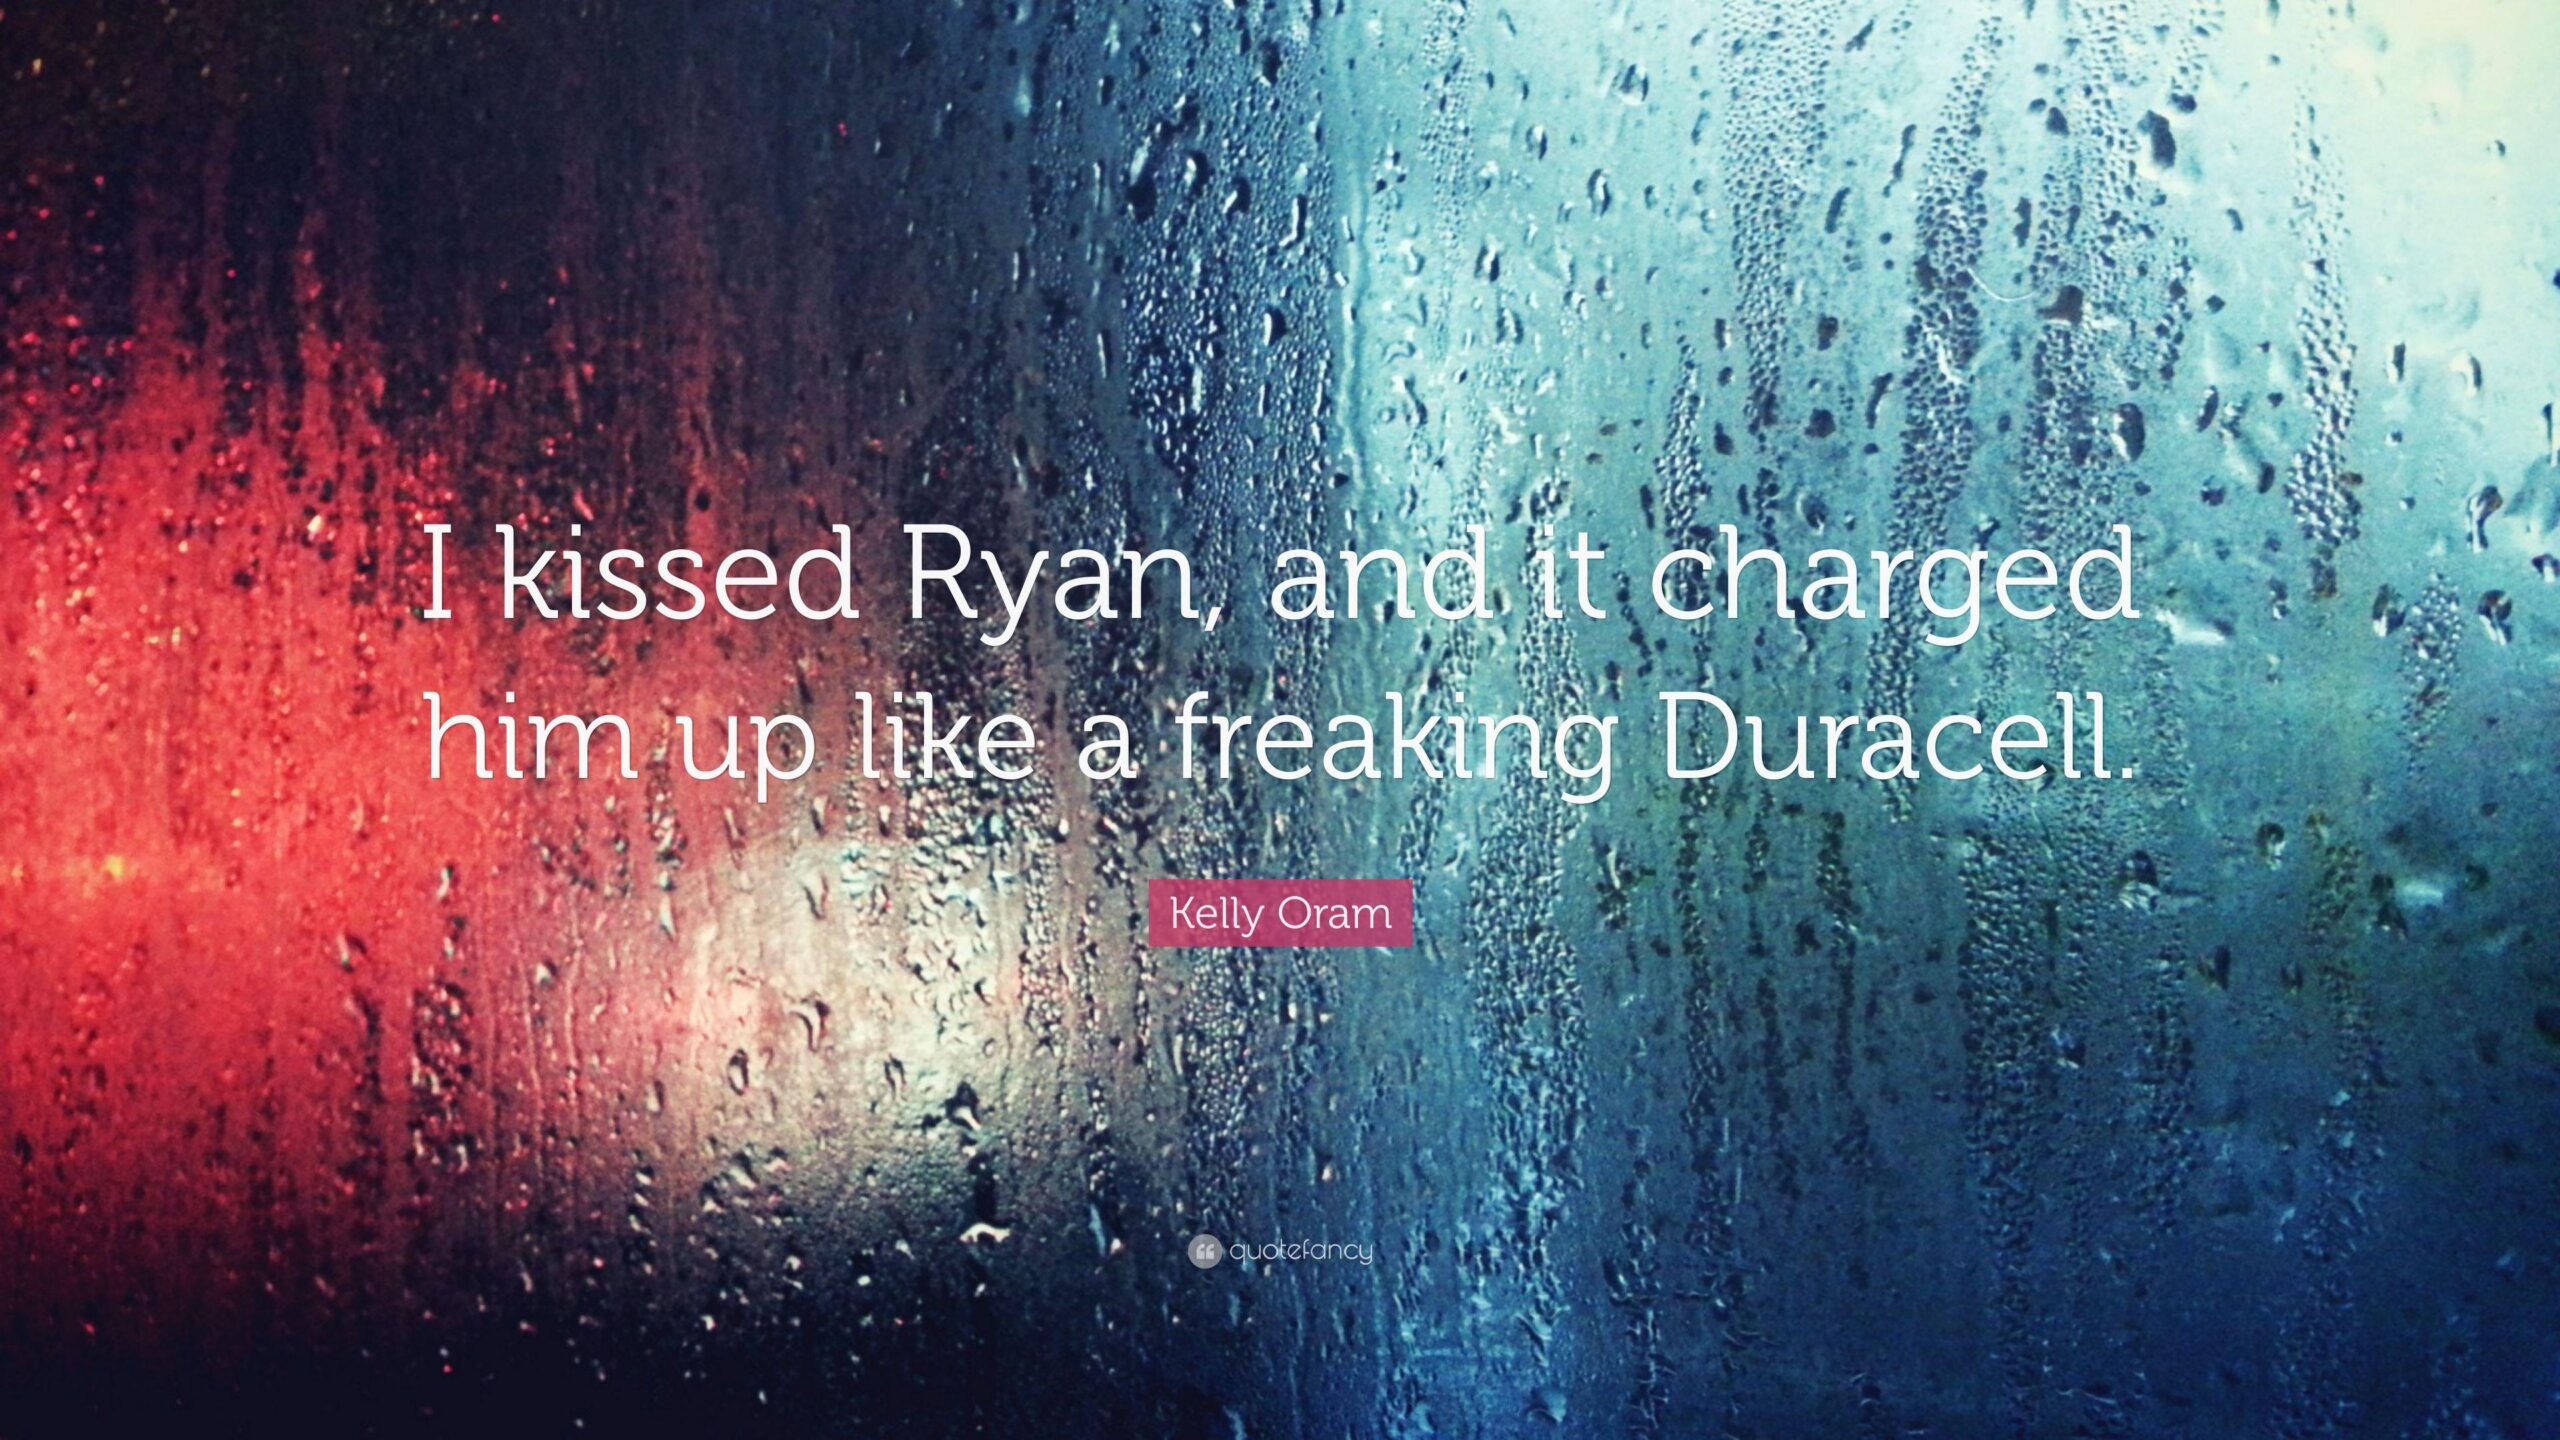 Kelly Oram Quote “I kissed Ryan, and it charged him up like a